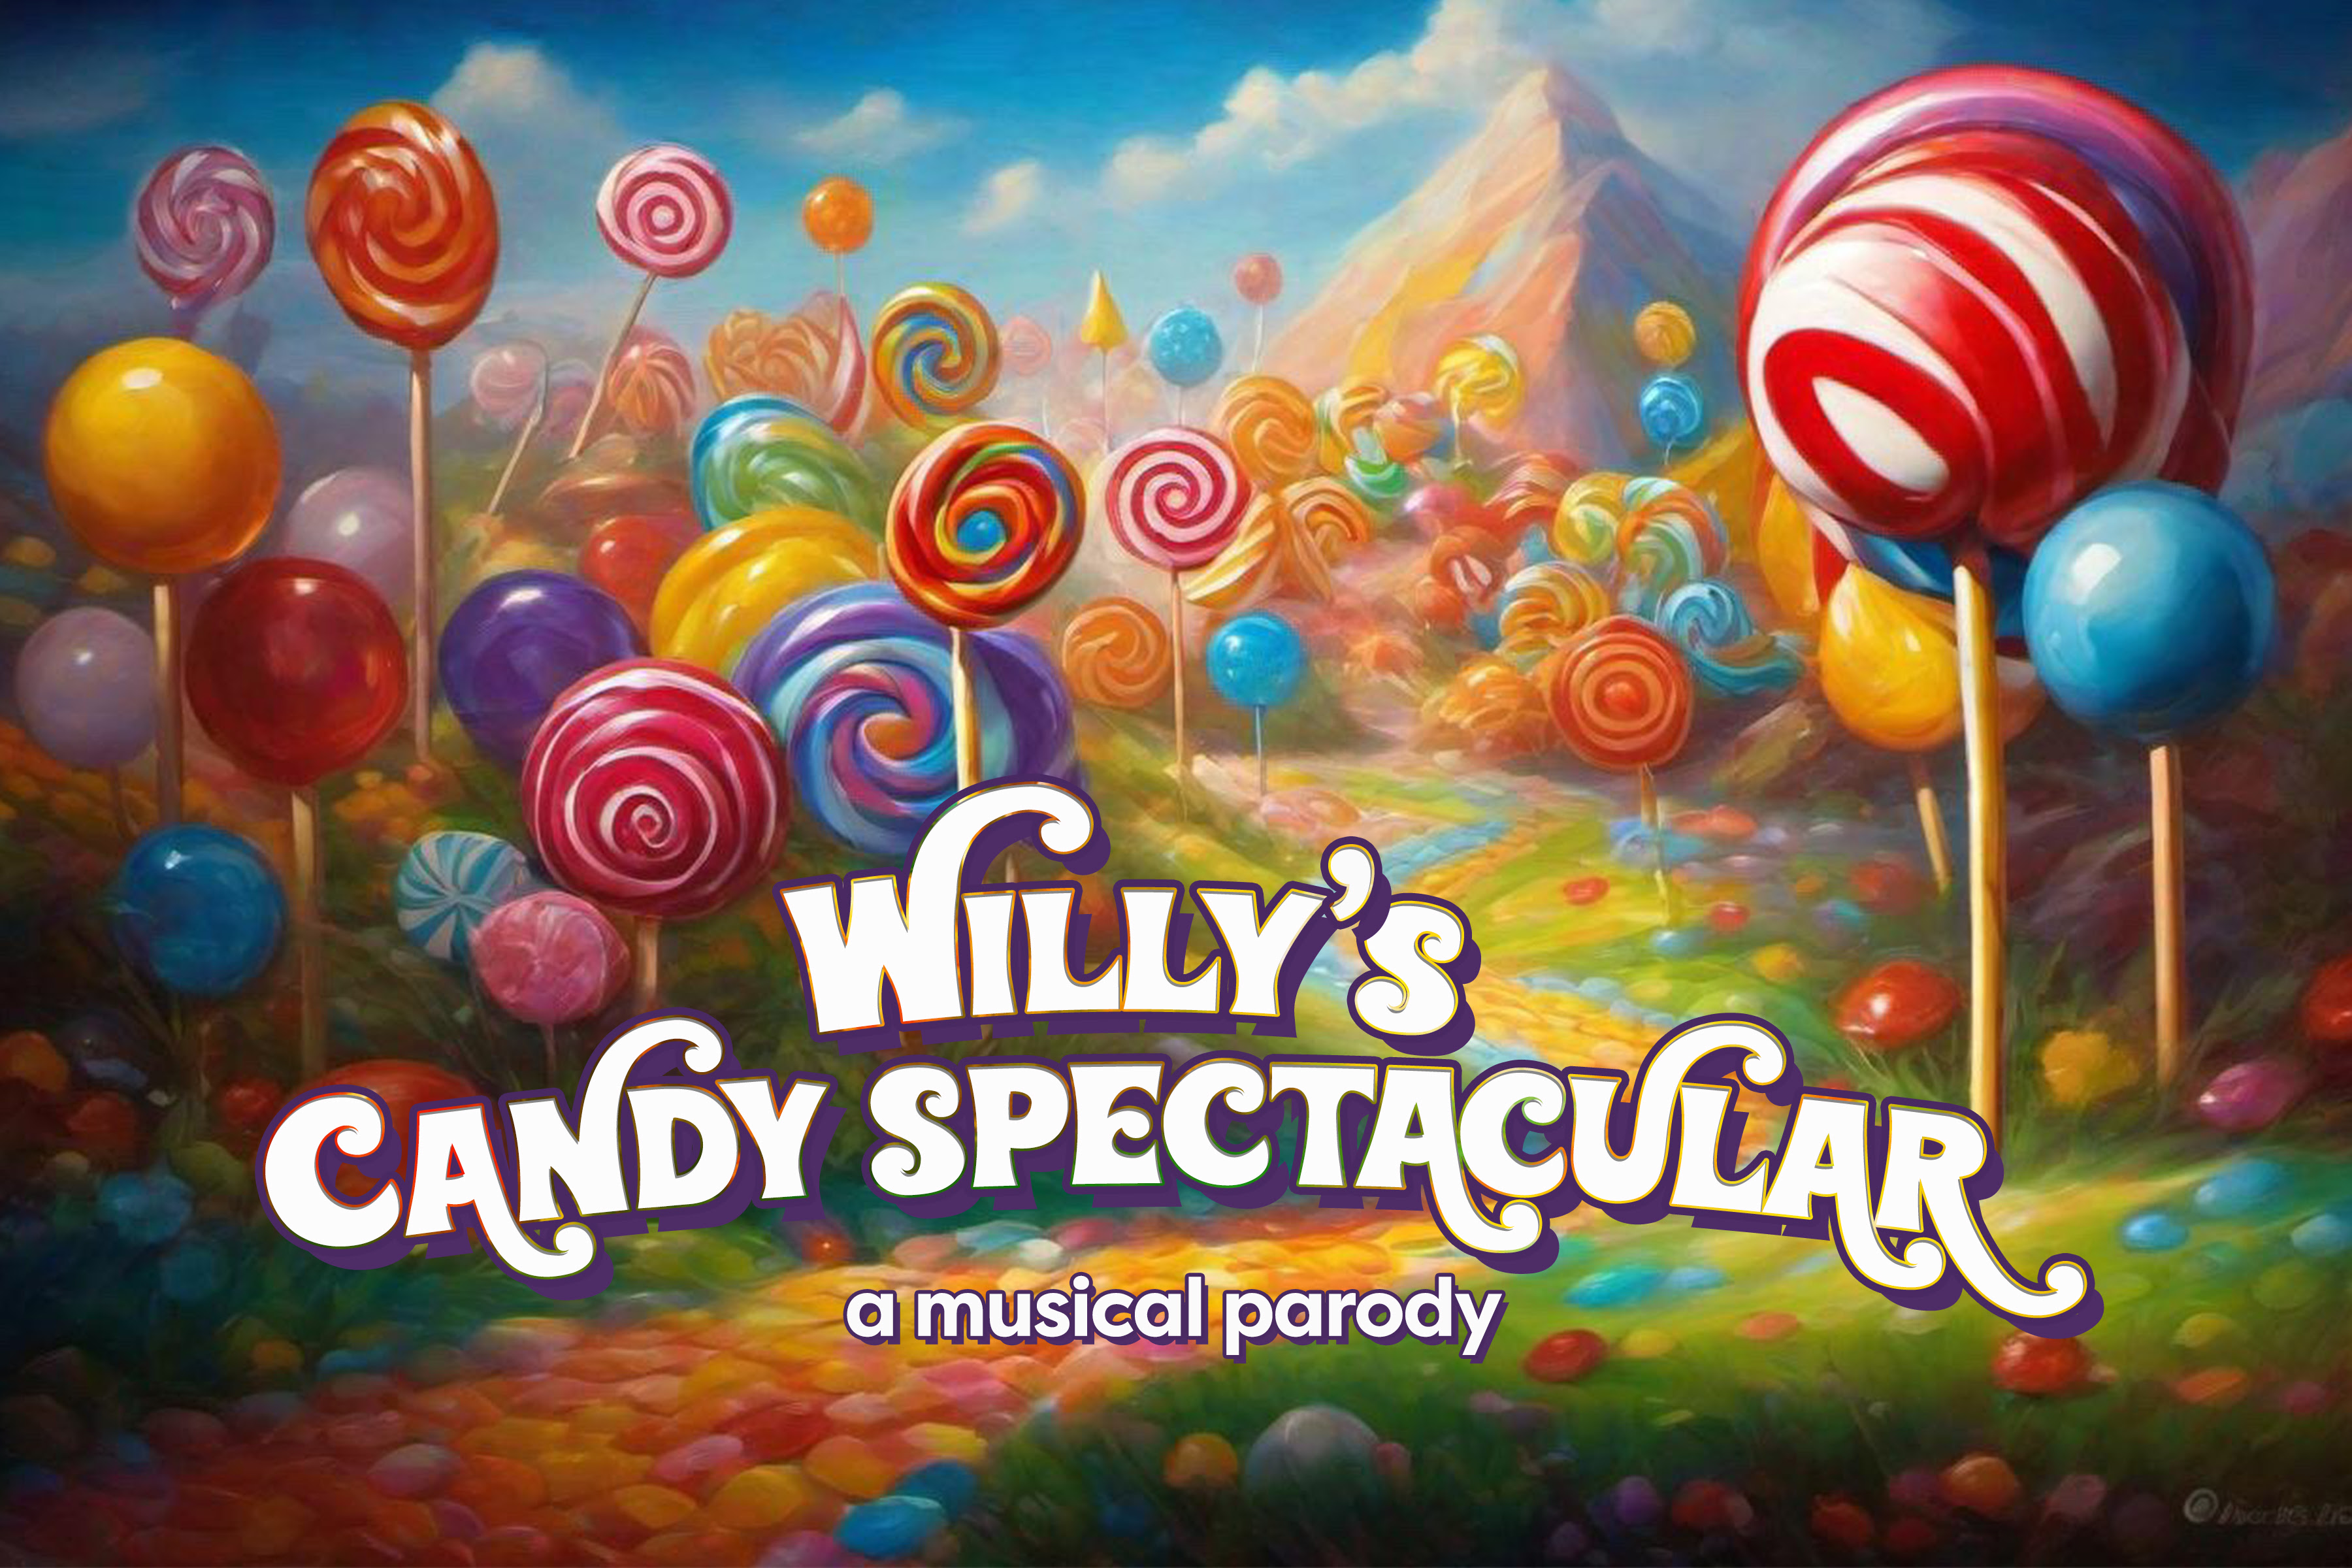 willys-cand-spectacular-a-musical-parody-stageplay-logo